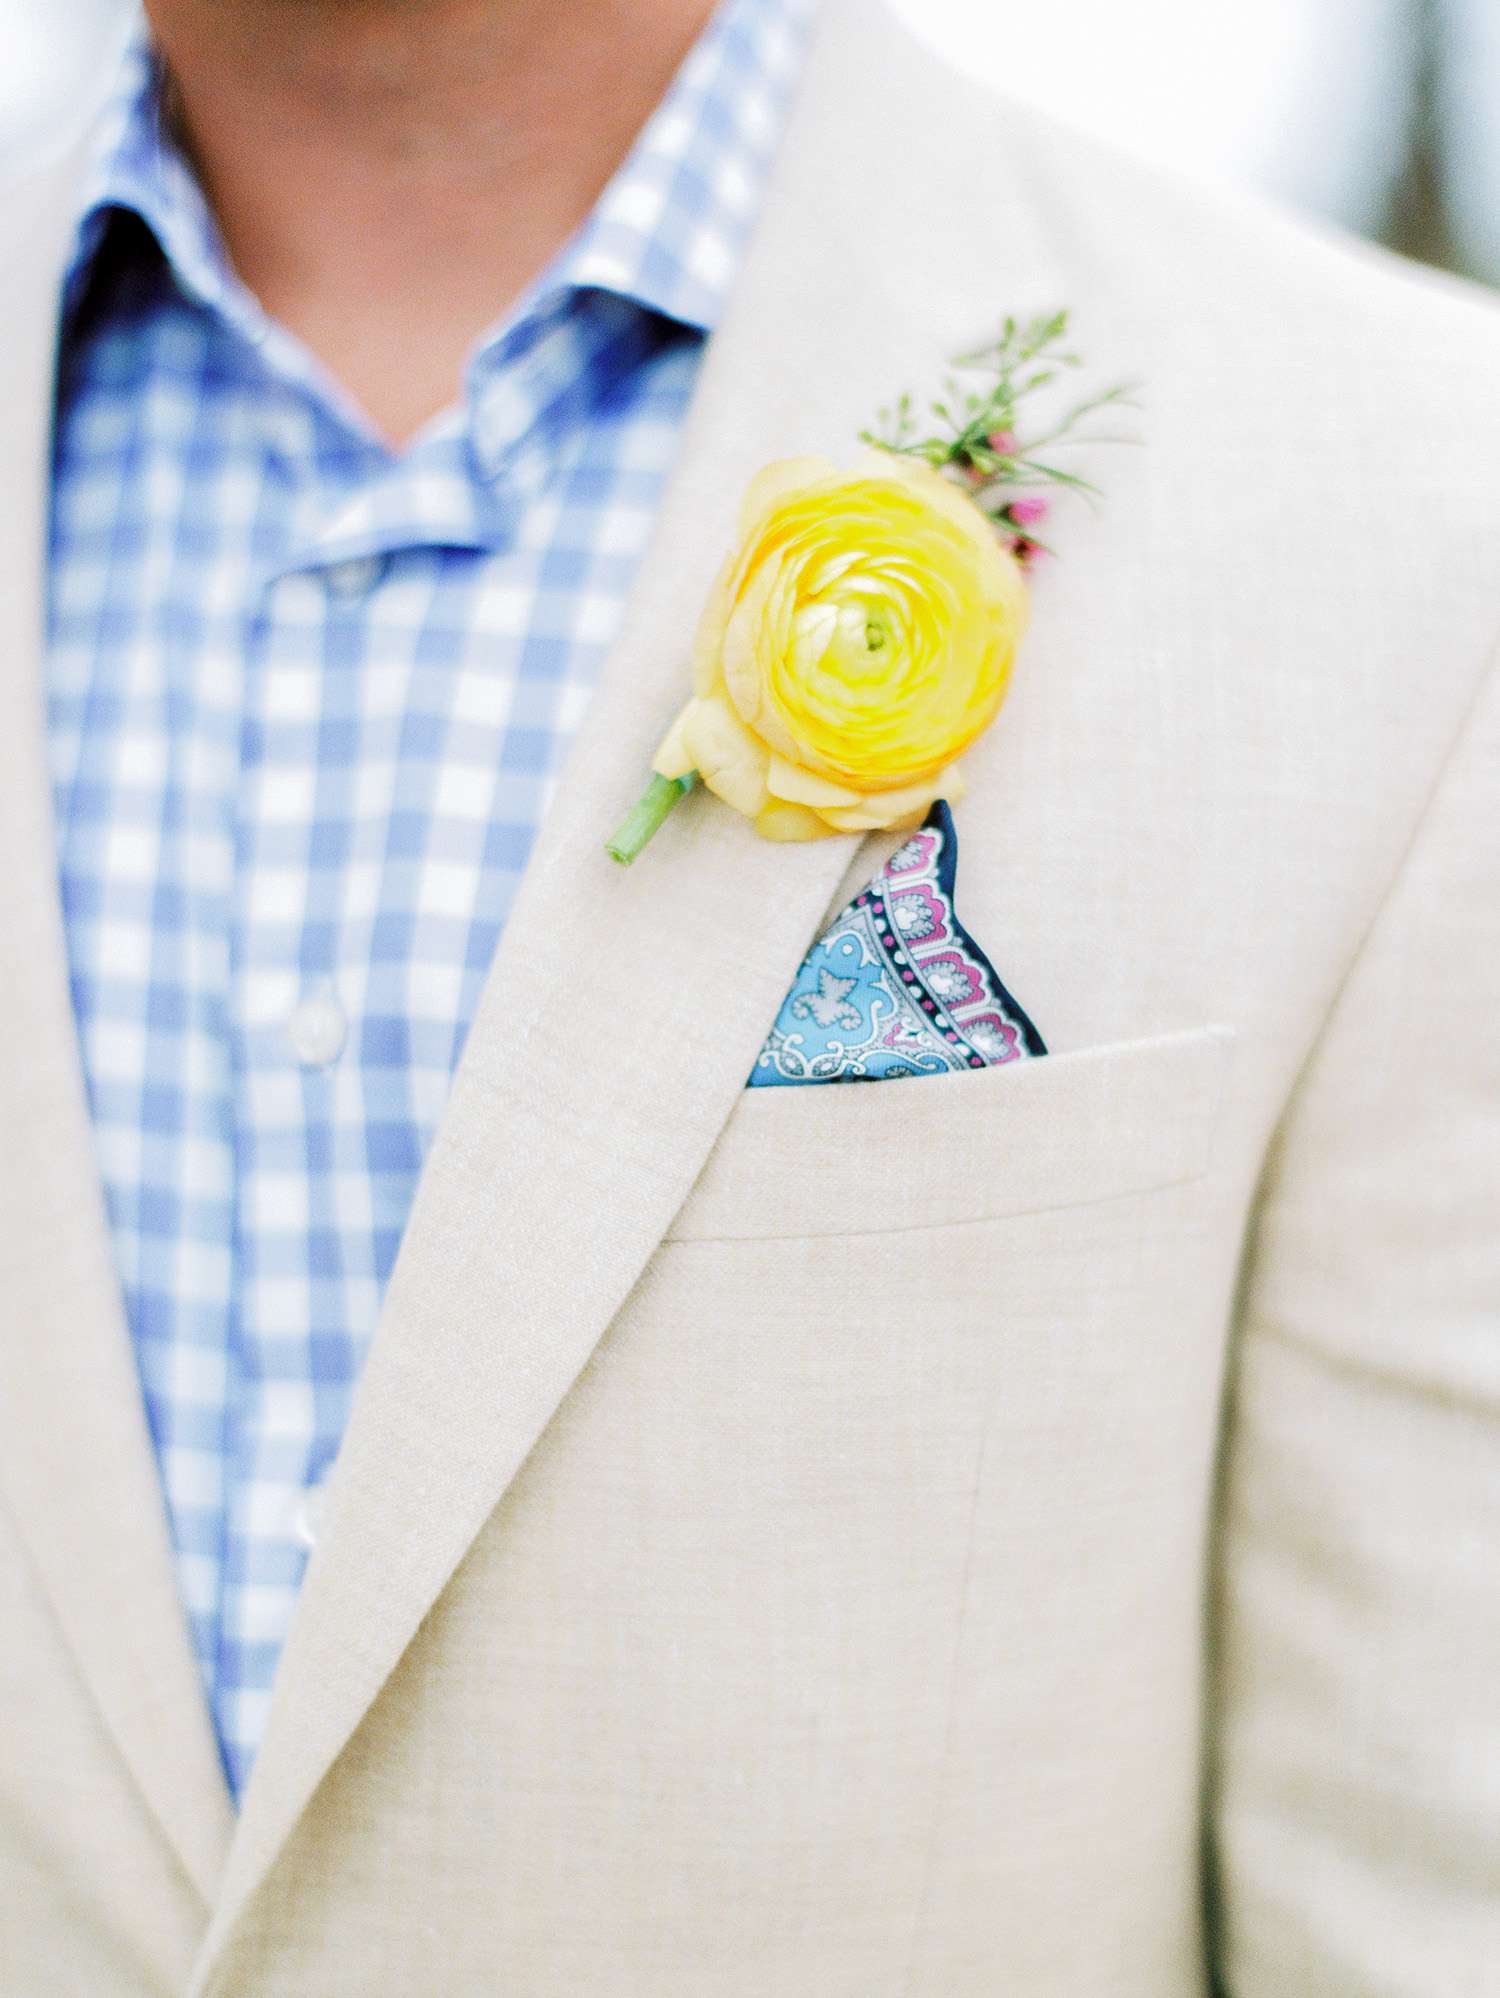 neon yellow boutonniere on suit jacket